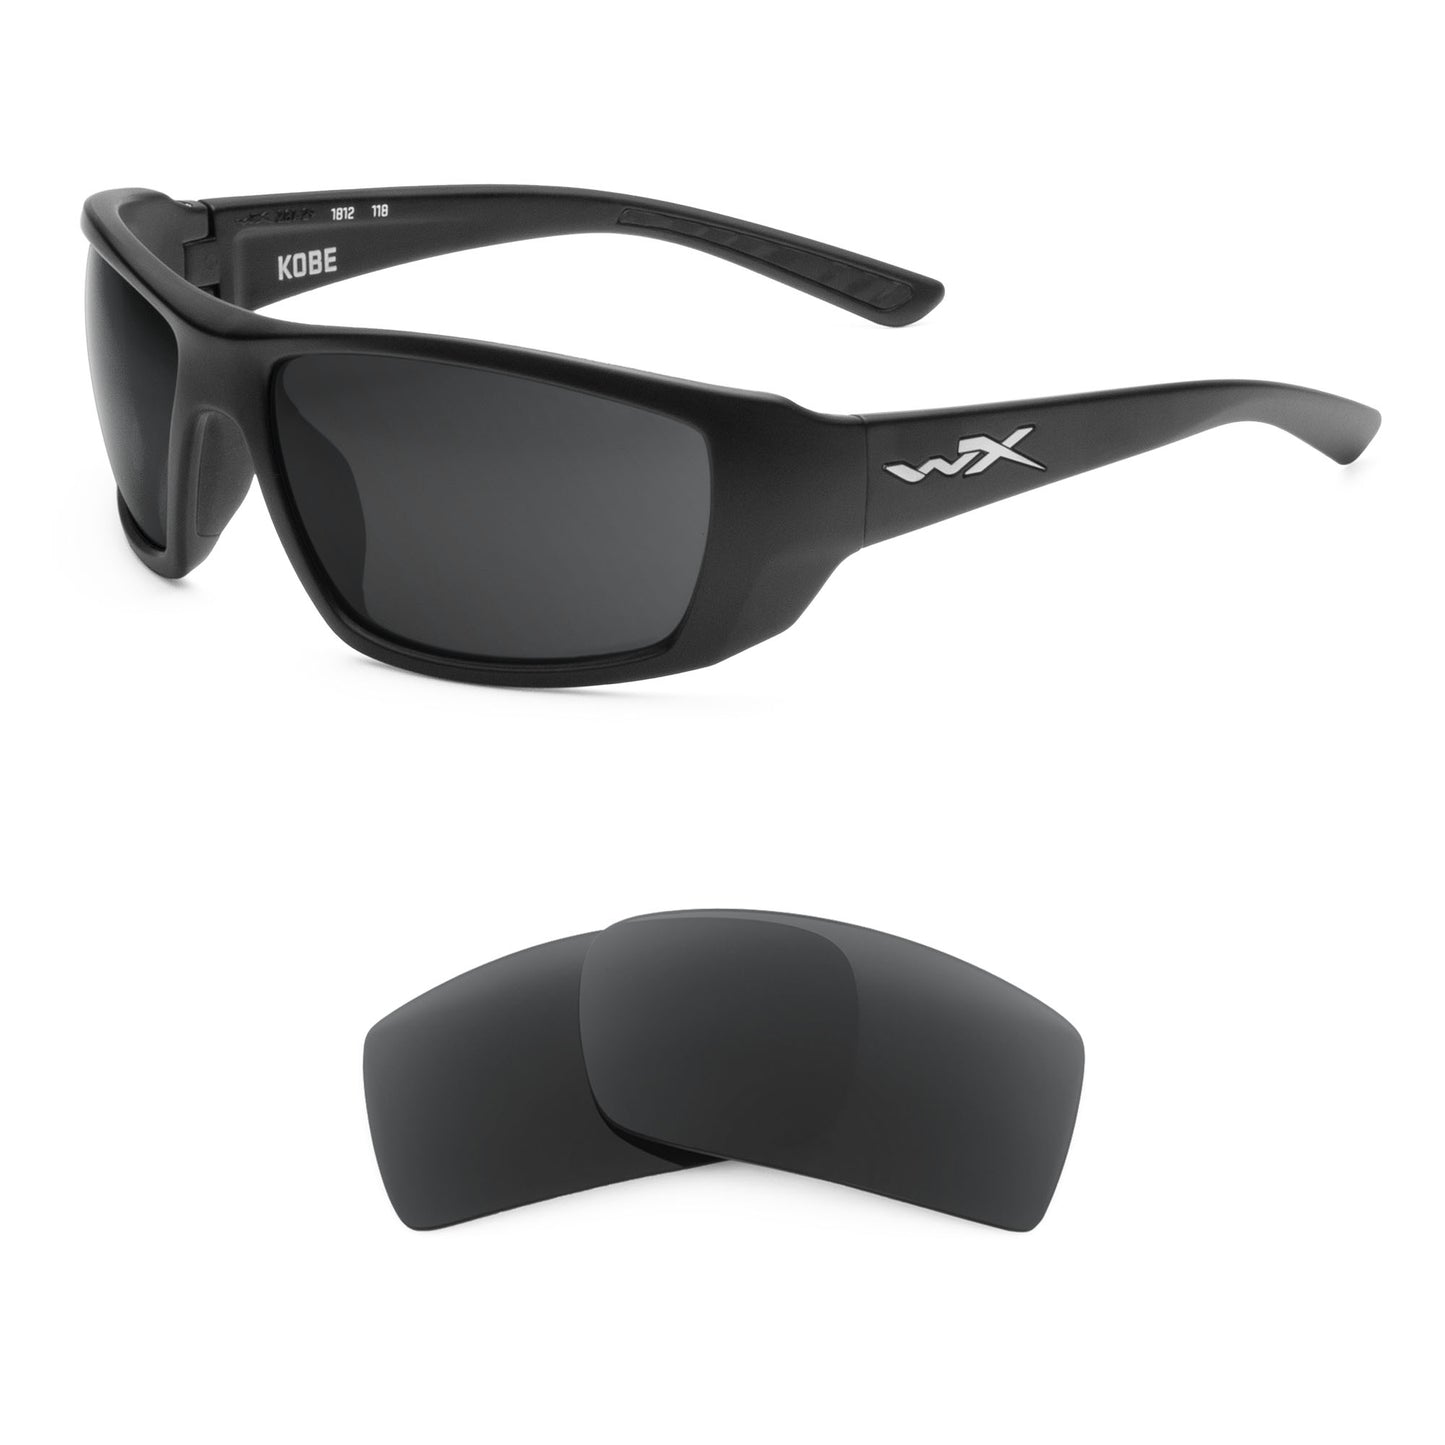 Wiley X Kobe sunglasses with replacement lenses